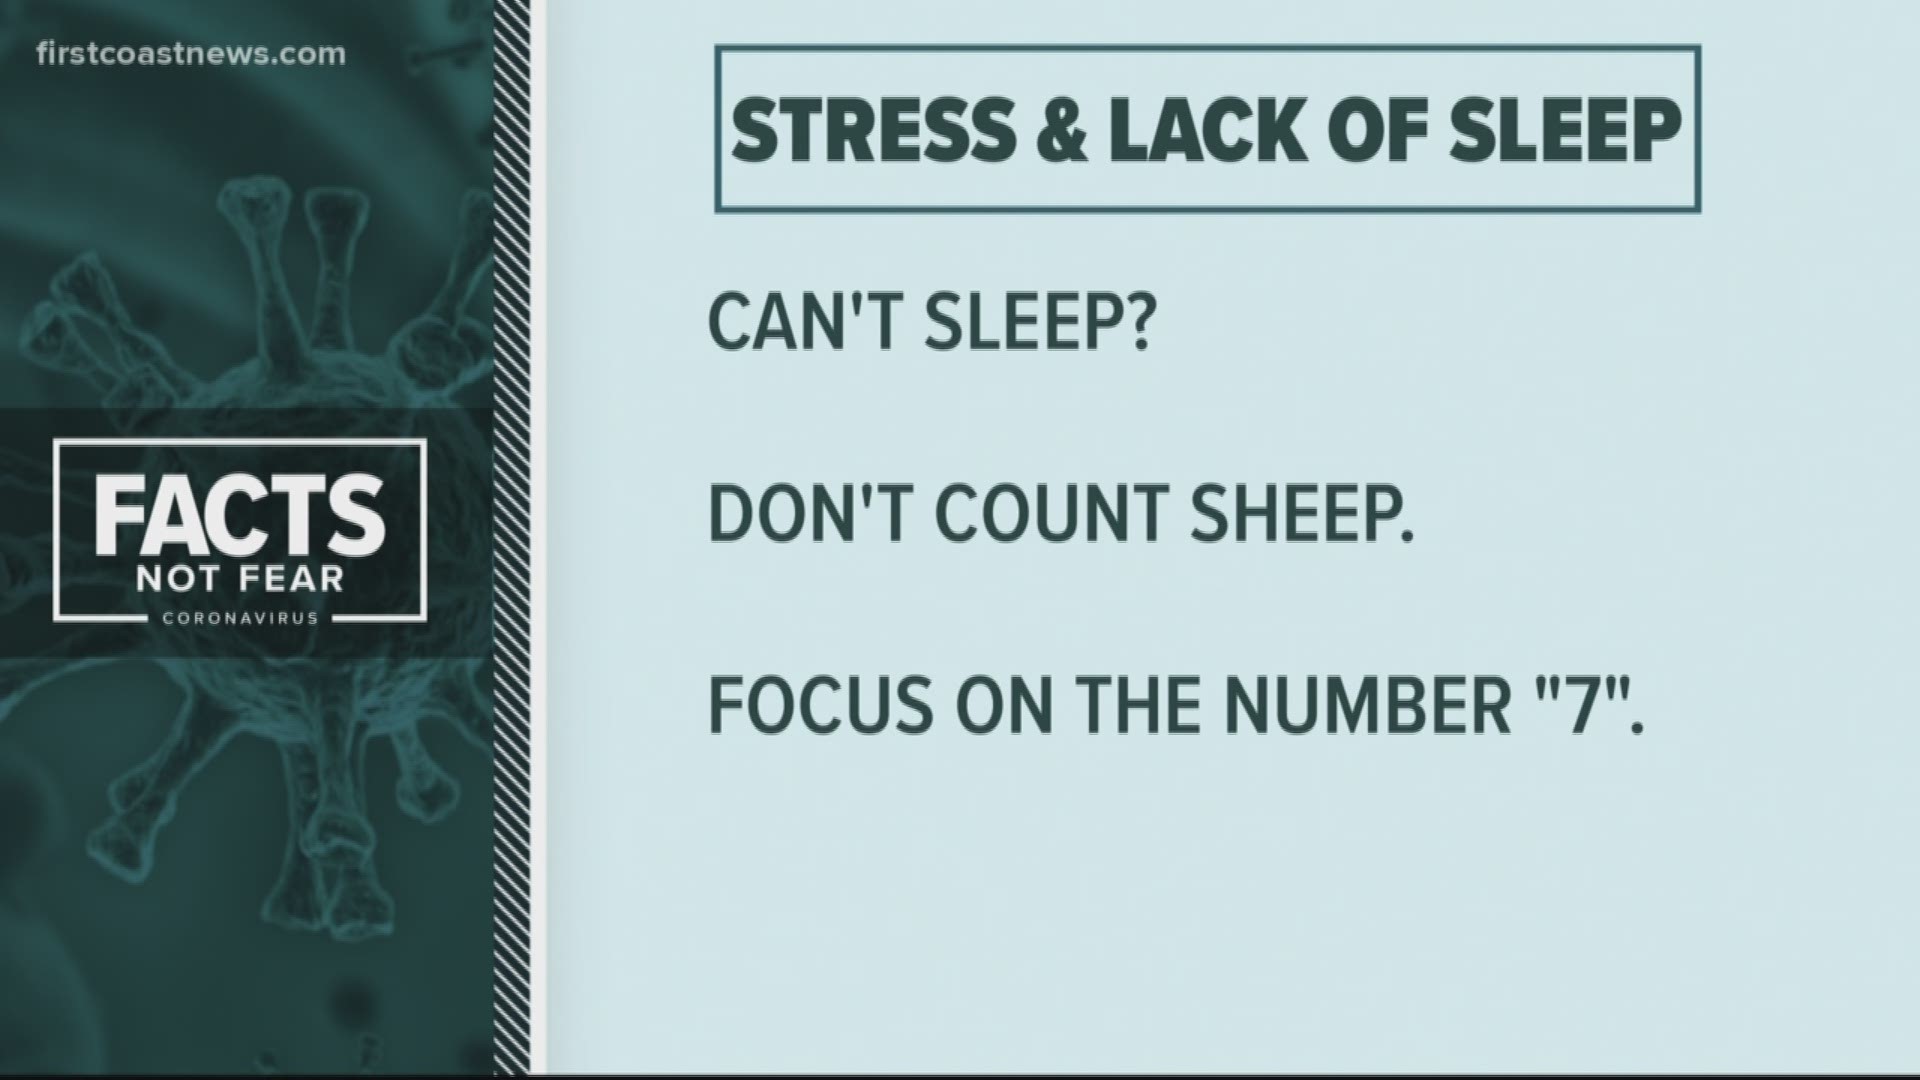 Can't sleep? Don't count sheep. Instead, think of the number seven.